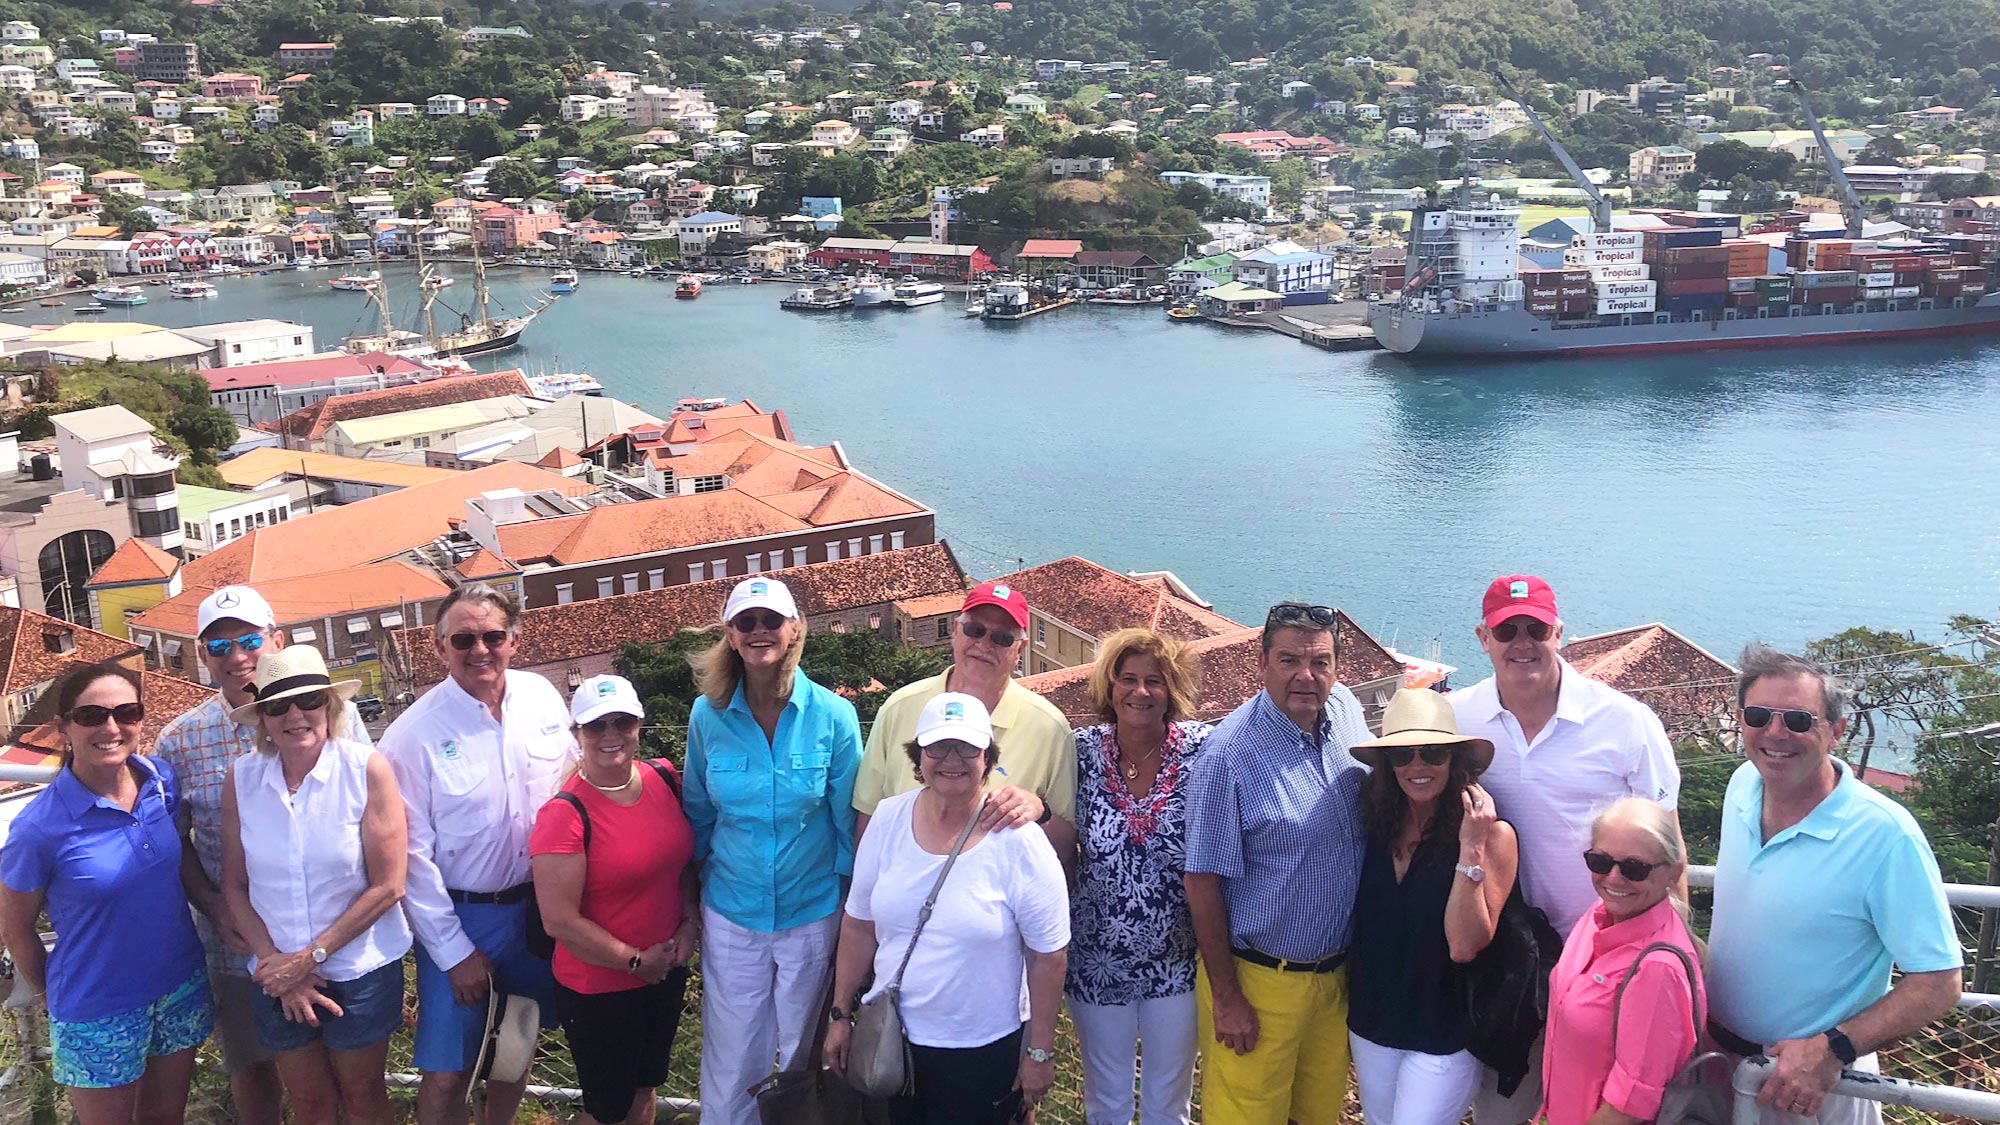 The Air Journey group arriving in St. George's, Grenada.